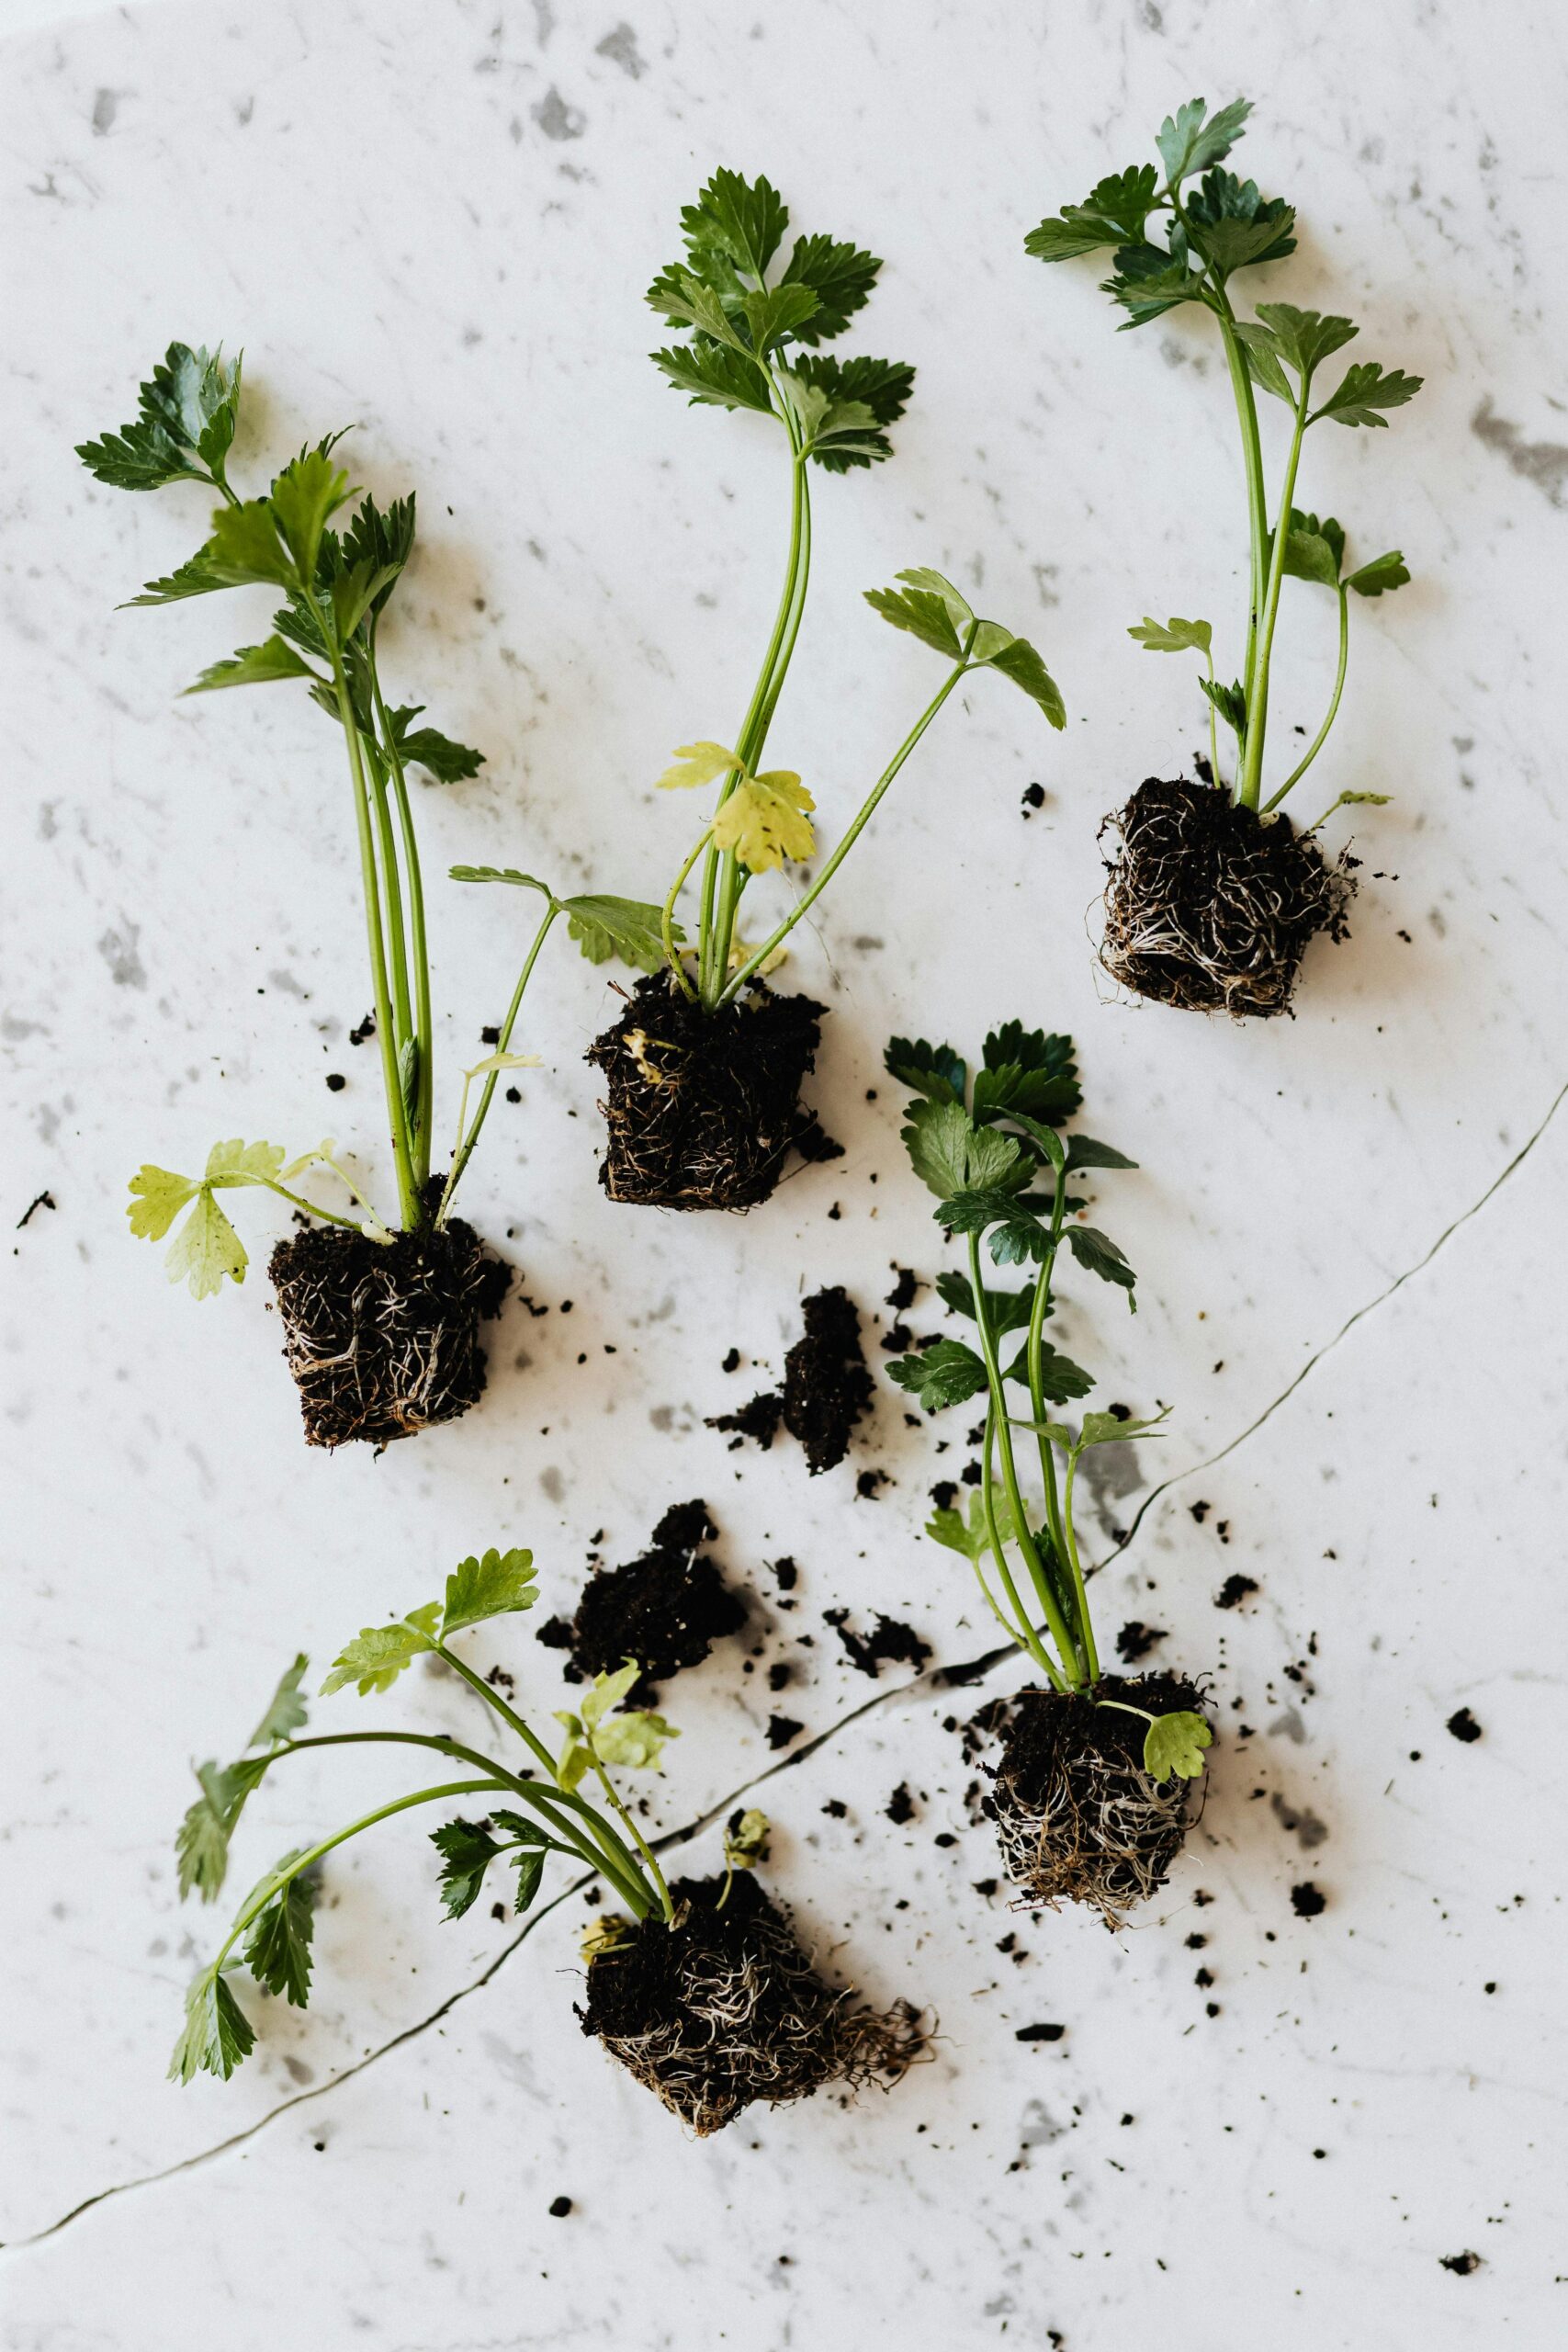 How to Identify and Fix Overwatering and Underwatering in Common Culinary Herbs